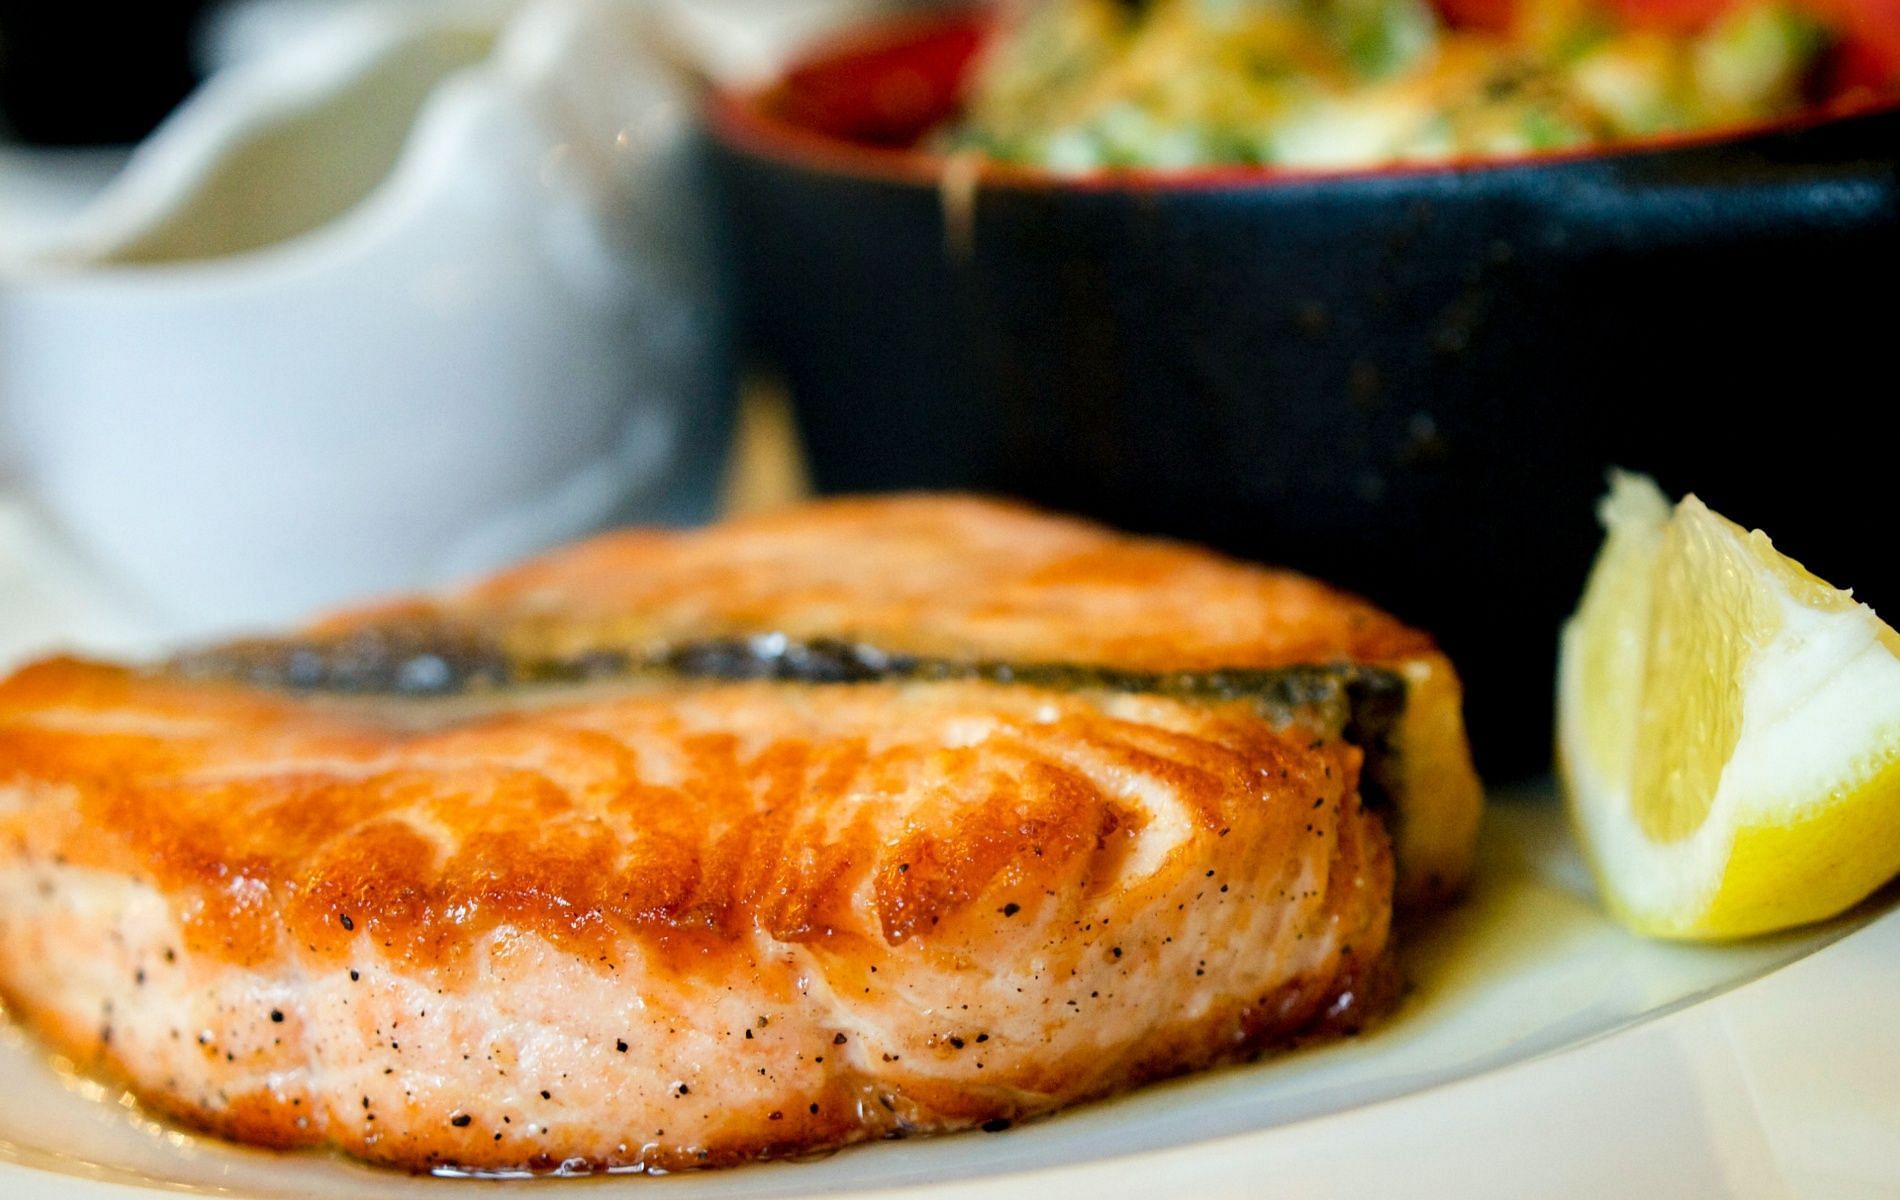 Eating fish can reduce mortality rates, statistics declare. (Image by Krisztina Papp via Pexels)